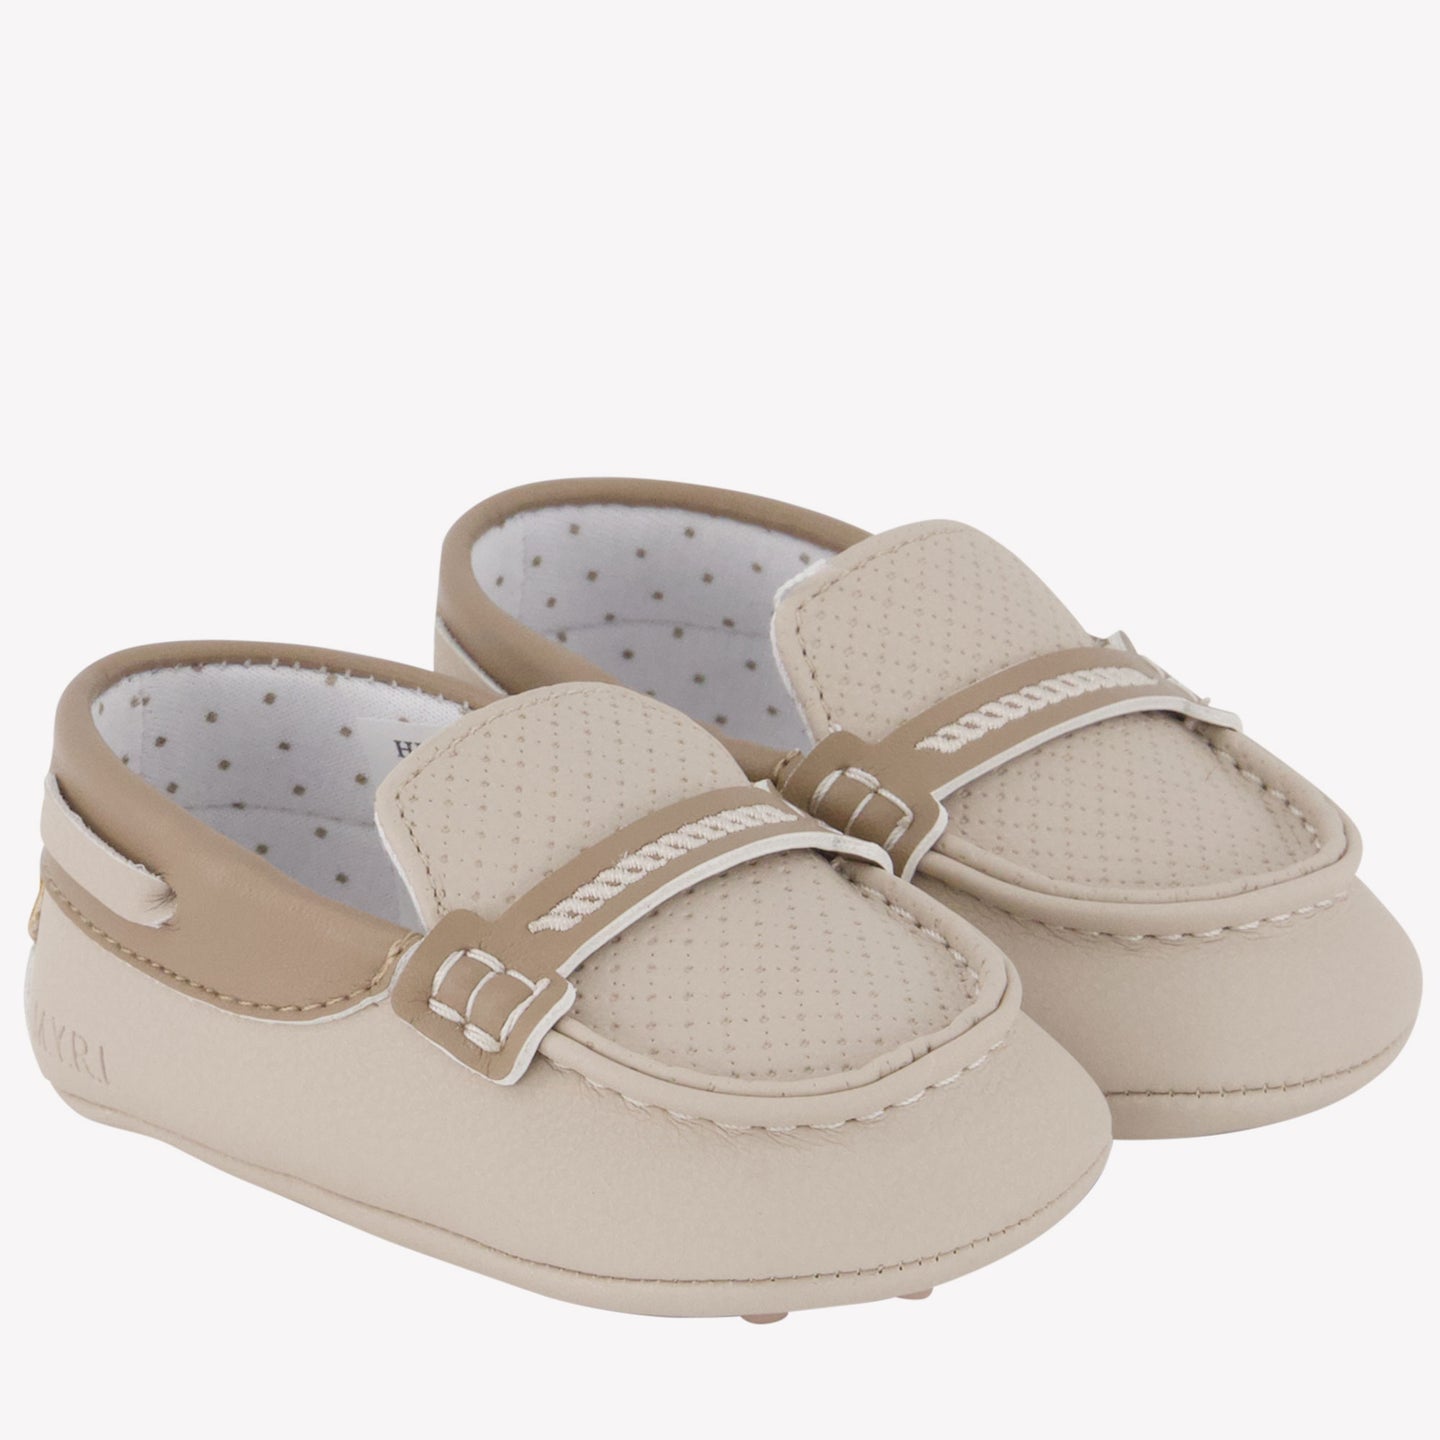 Mayoral Baby guys Shoes Beige